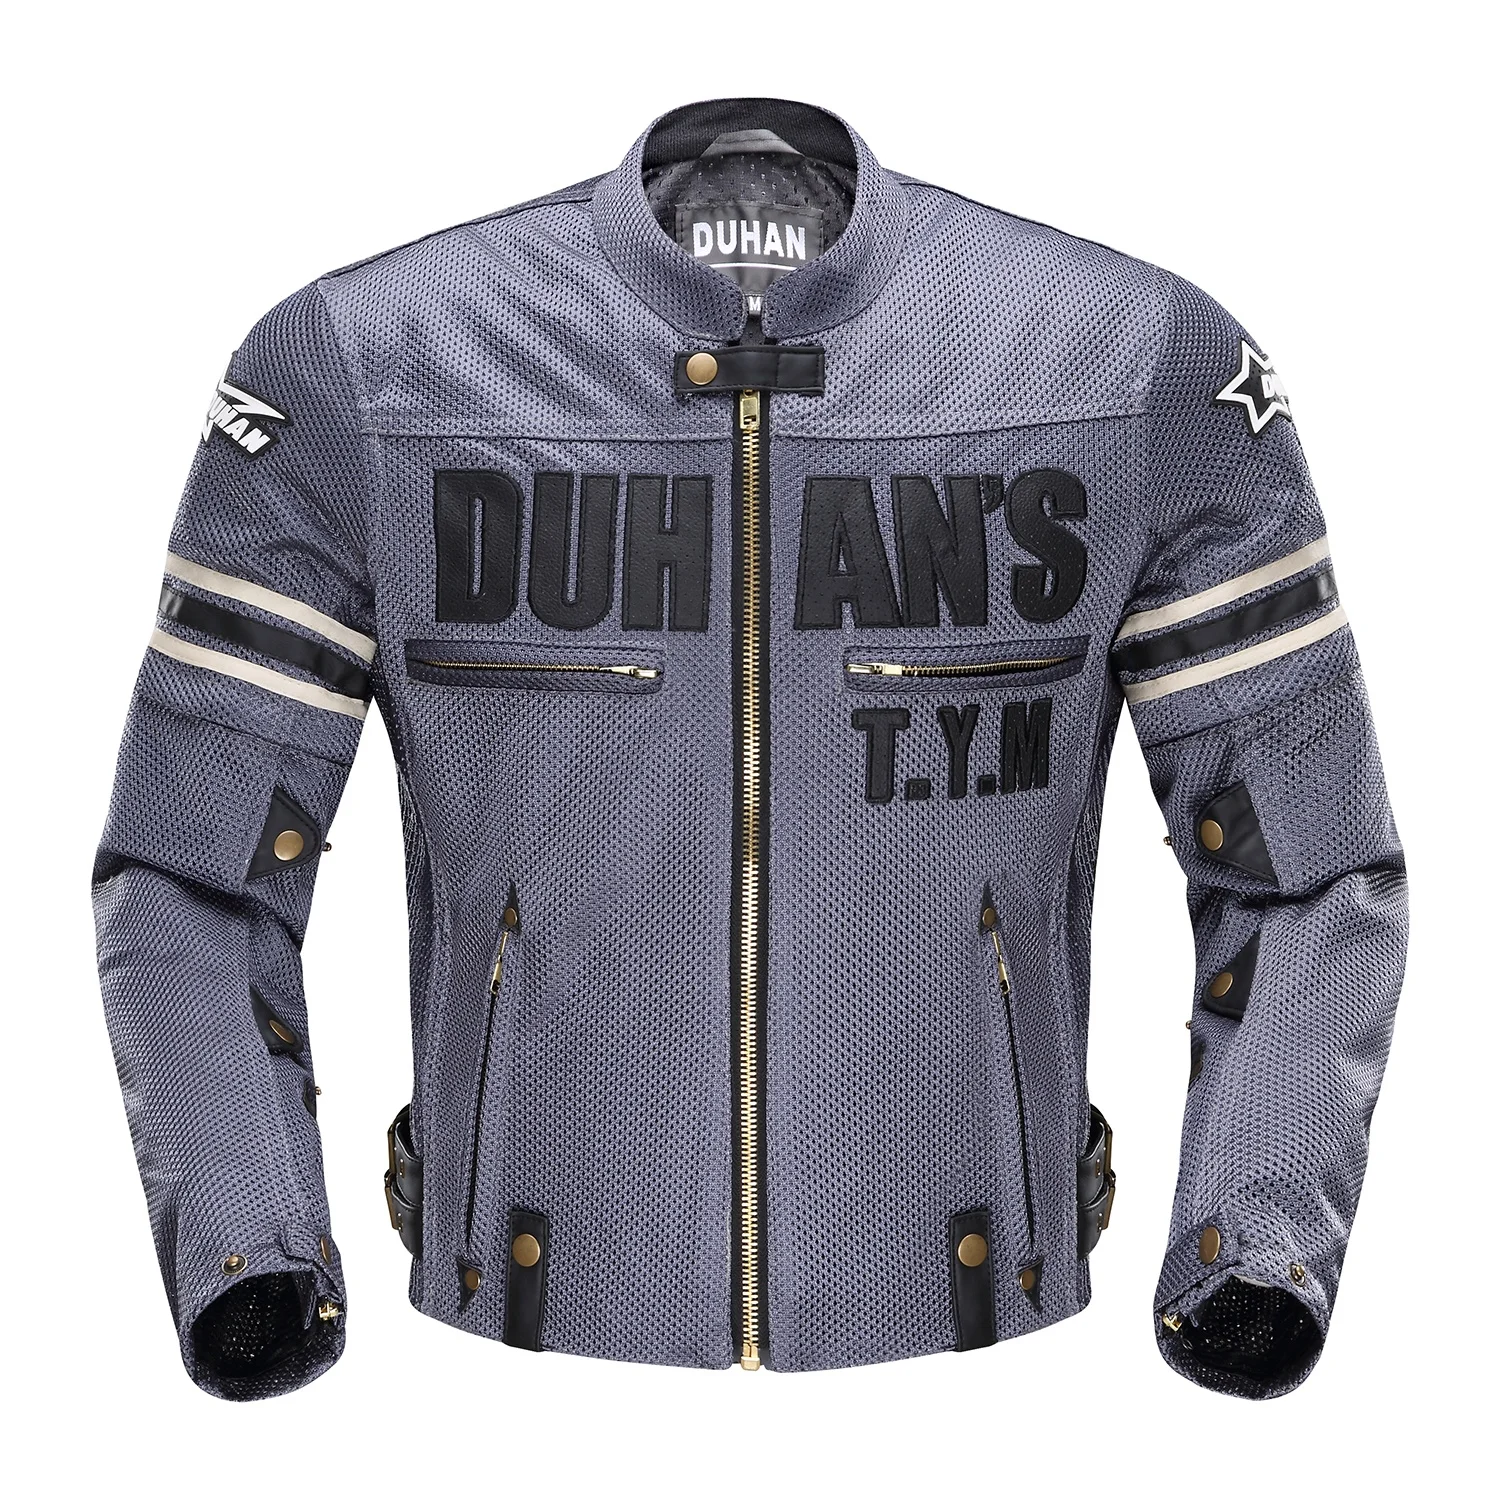 Breathable Duhan Motorcycle Jacket Design Custom Motorcycle Jackets Motocross Jacket For Summer Buy Design Custom Motorcycle Jackets Duhan Motorcycle Jacket Moto Jacket Motocross Jacket Motorcycle Auto Racing Wear Men Racing Suit Riding